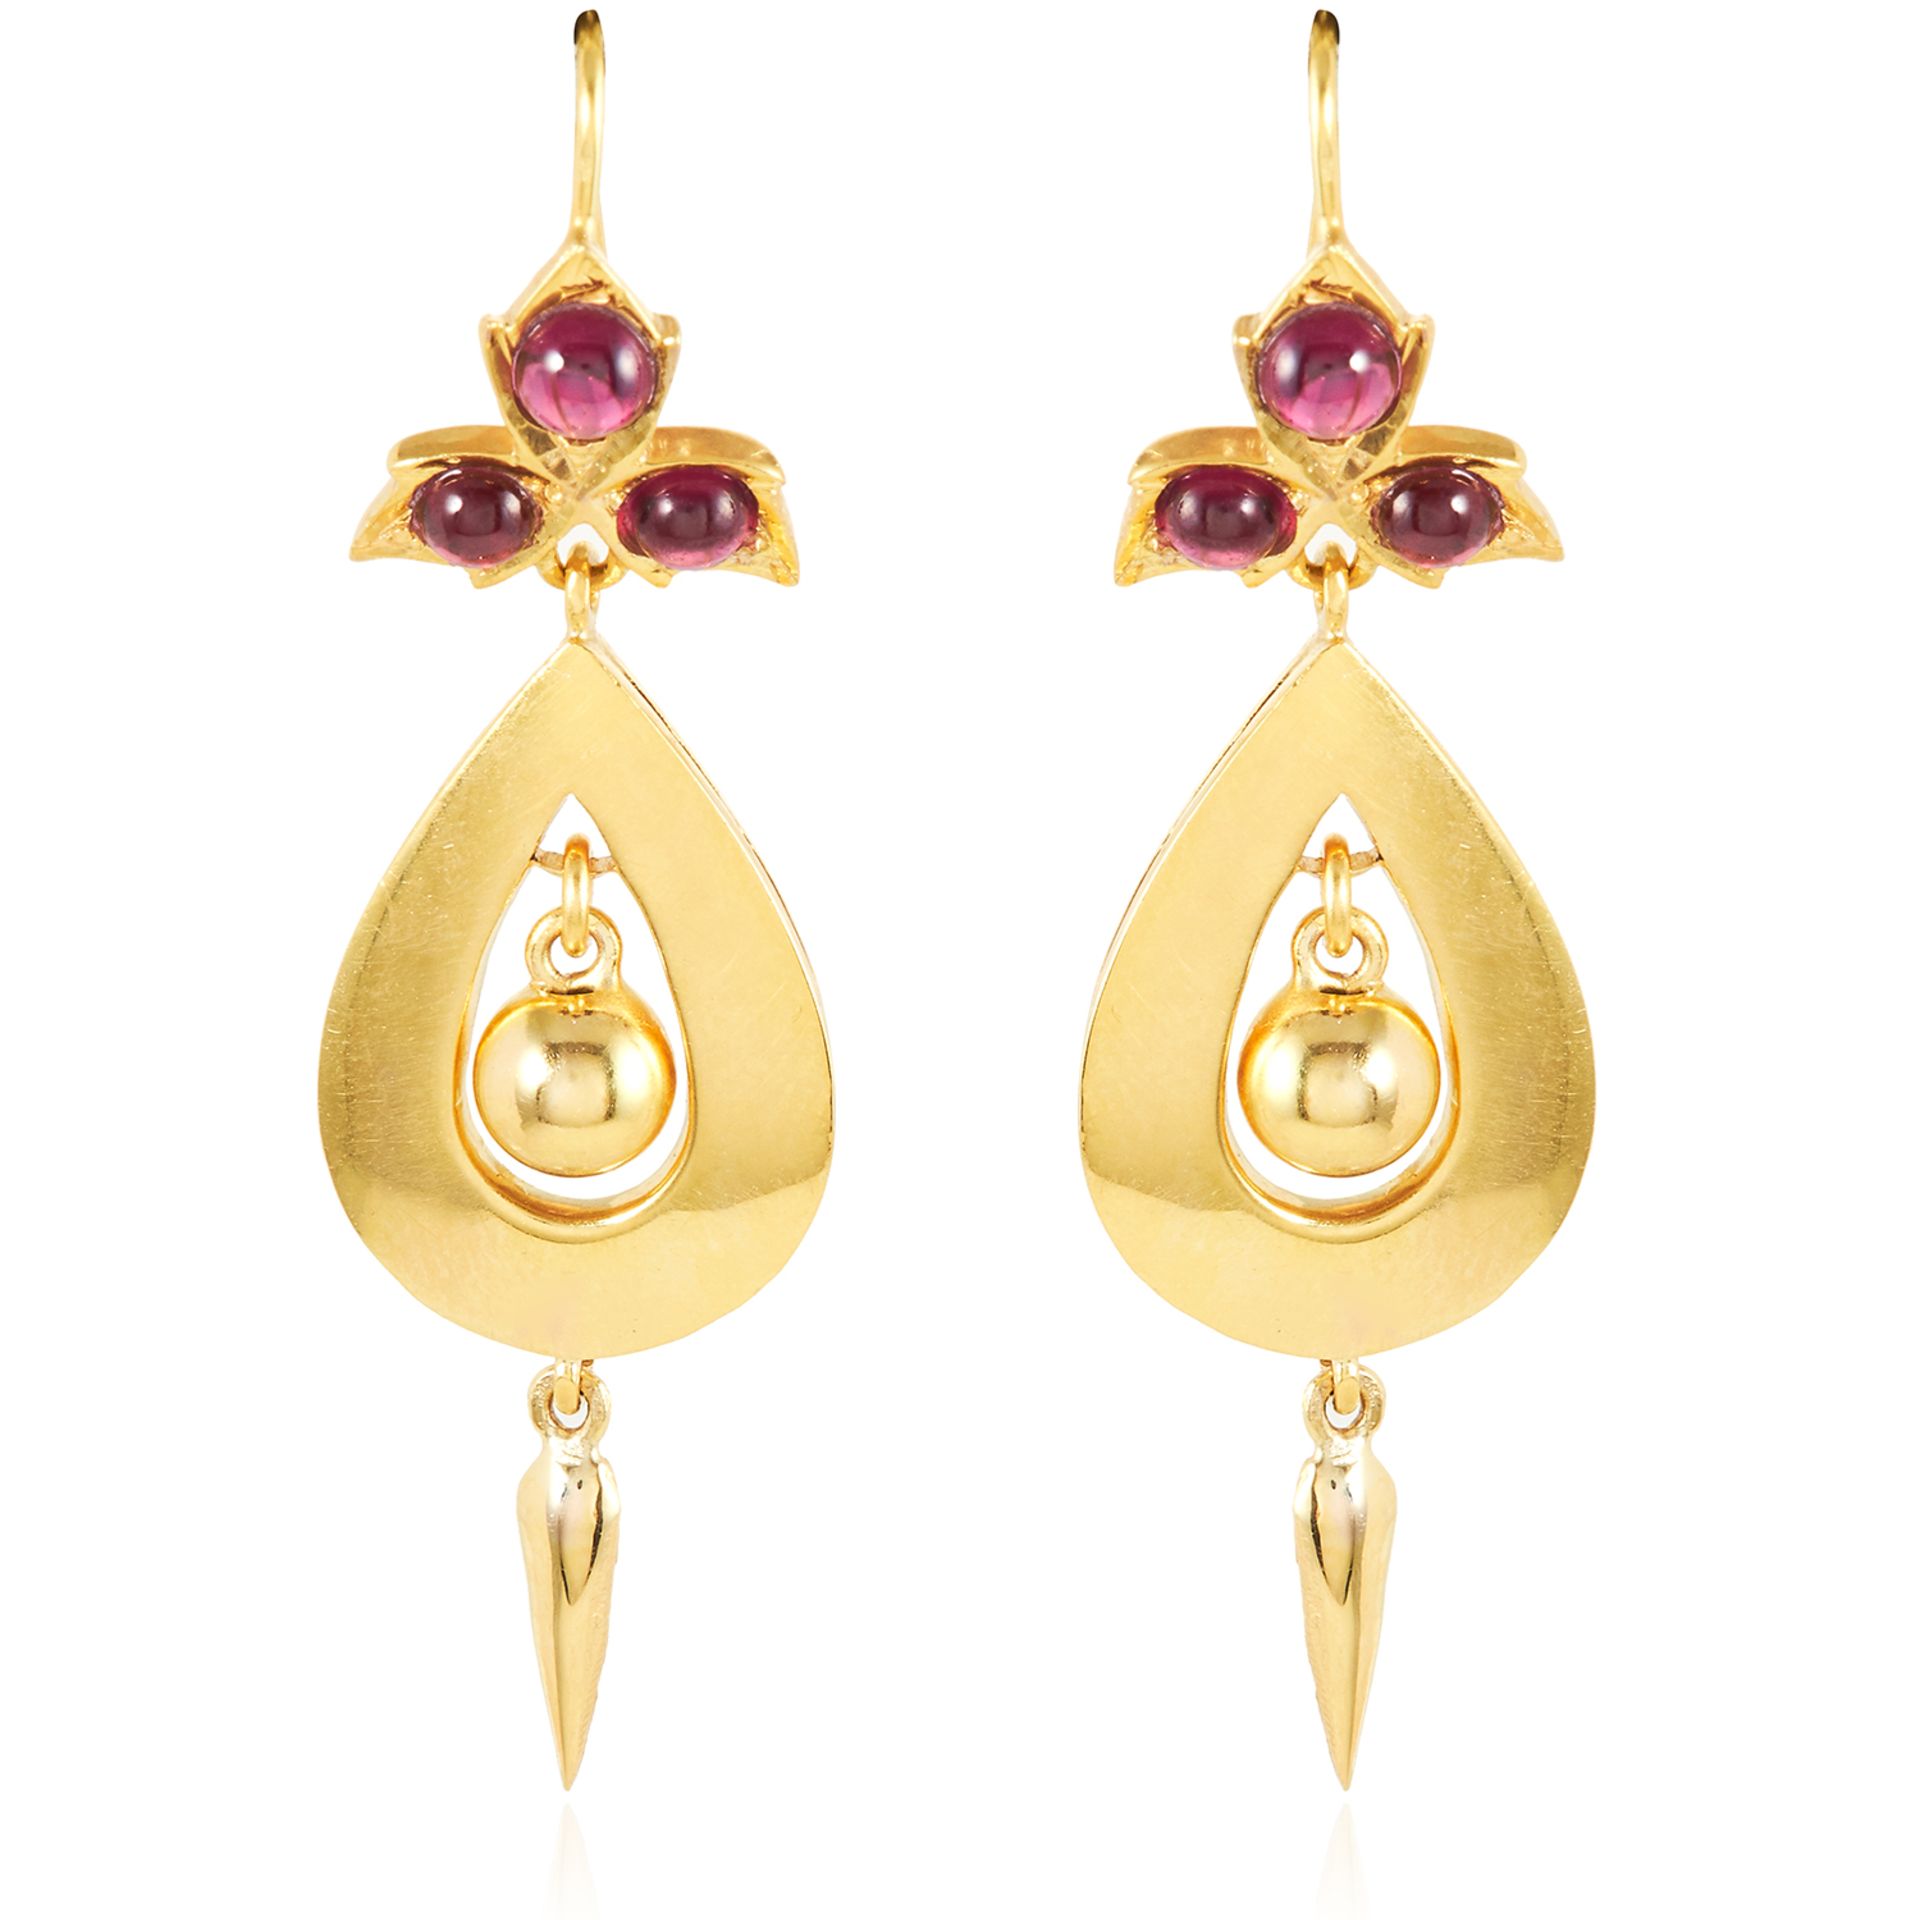 A PAIR OF ANTIQUE GARNET DROP EARRINGS, 19TH CENTURY in high carat yellow gold, each with a